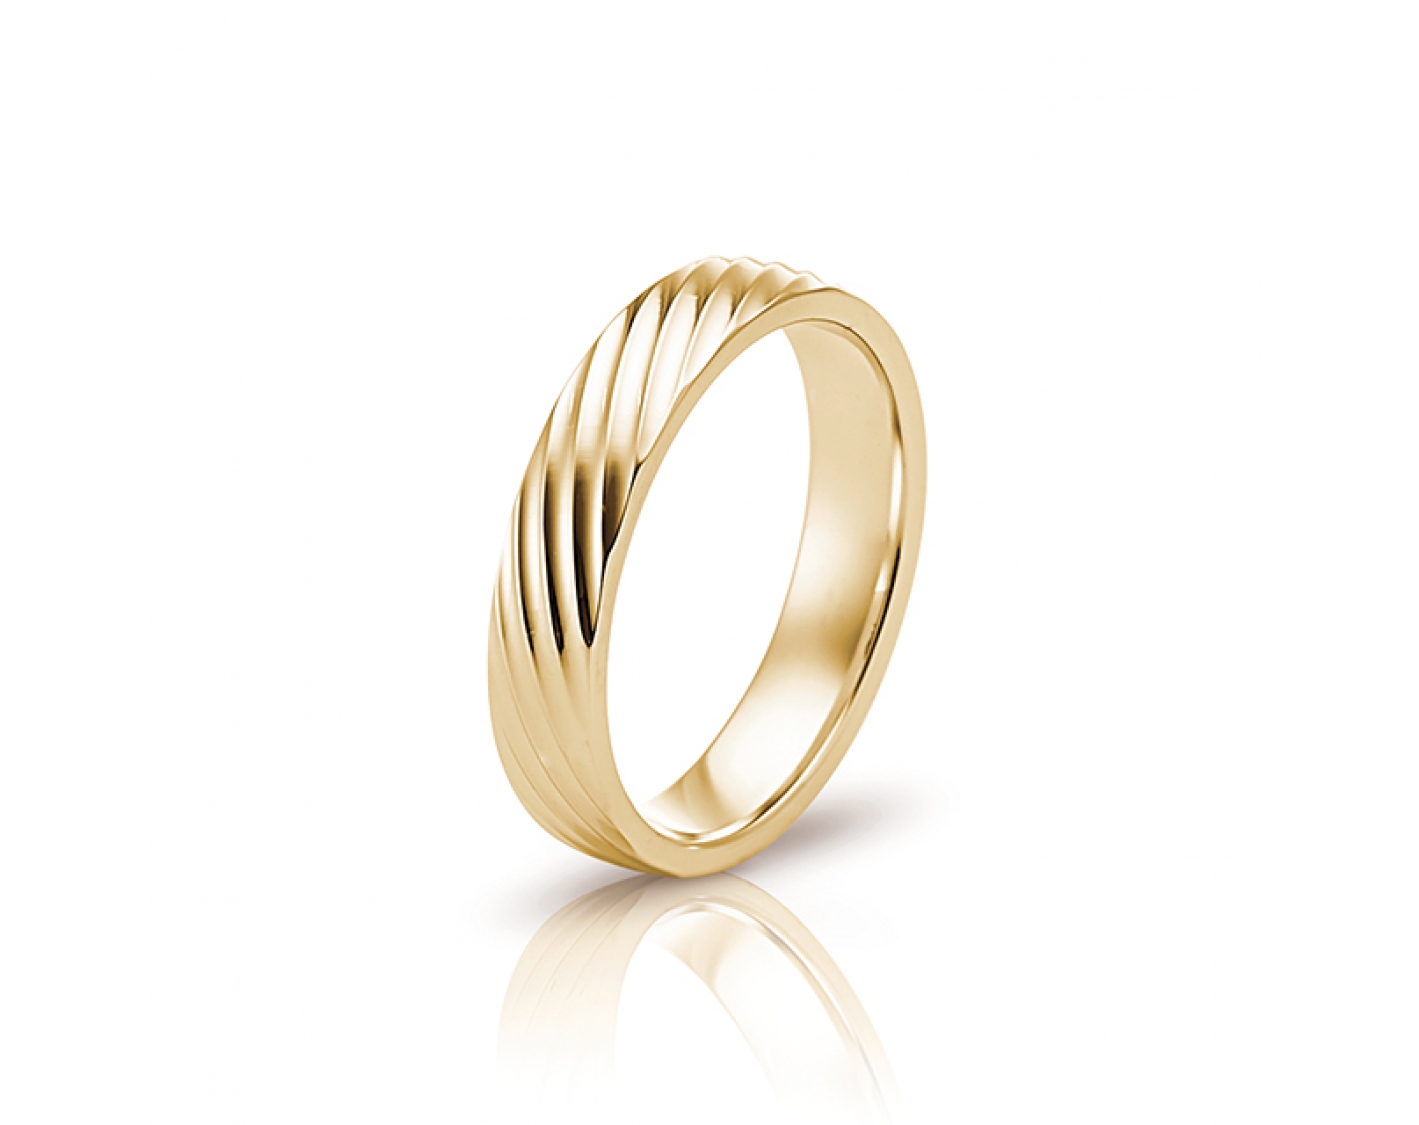 18k yellow gold 5mm matte wedding band with shiny lines